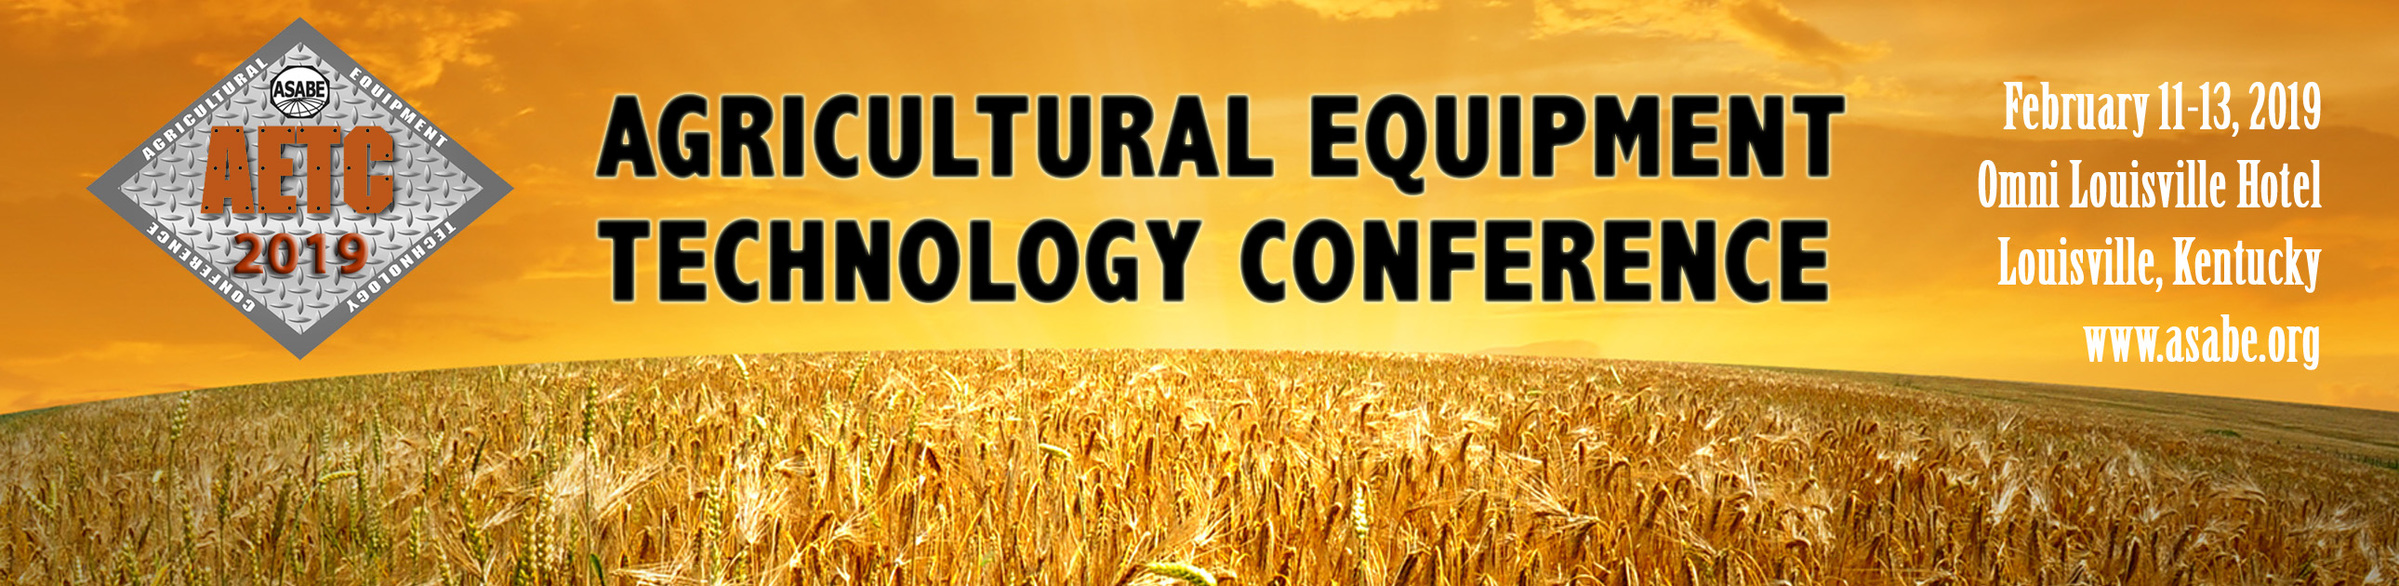 2019 Agricultural Equipment Technology Conference